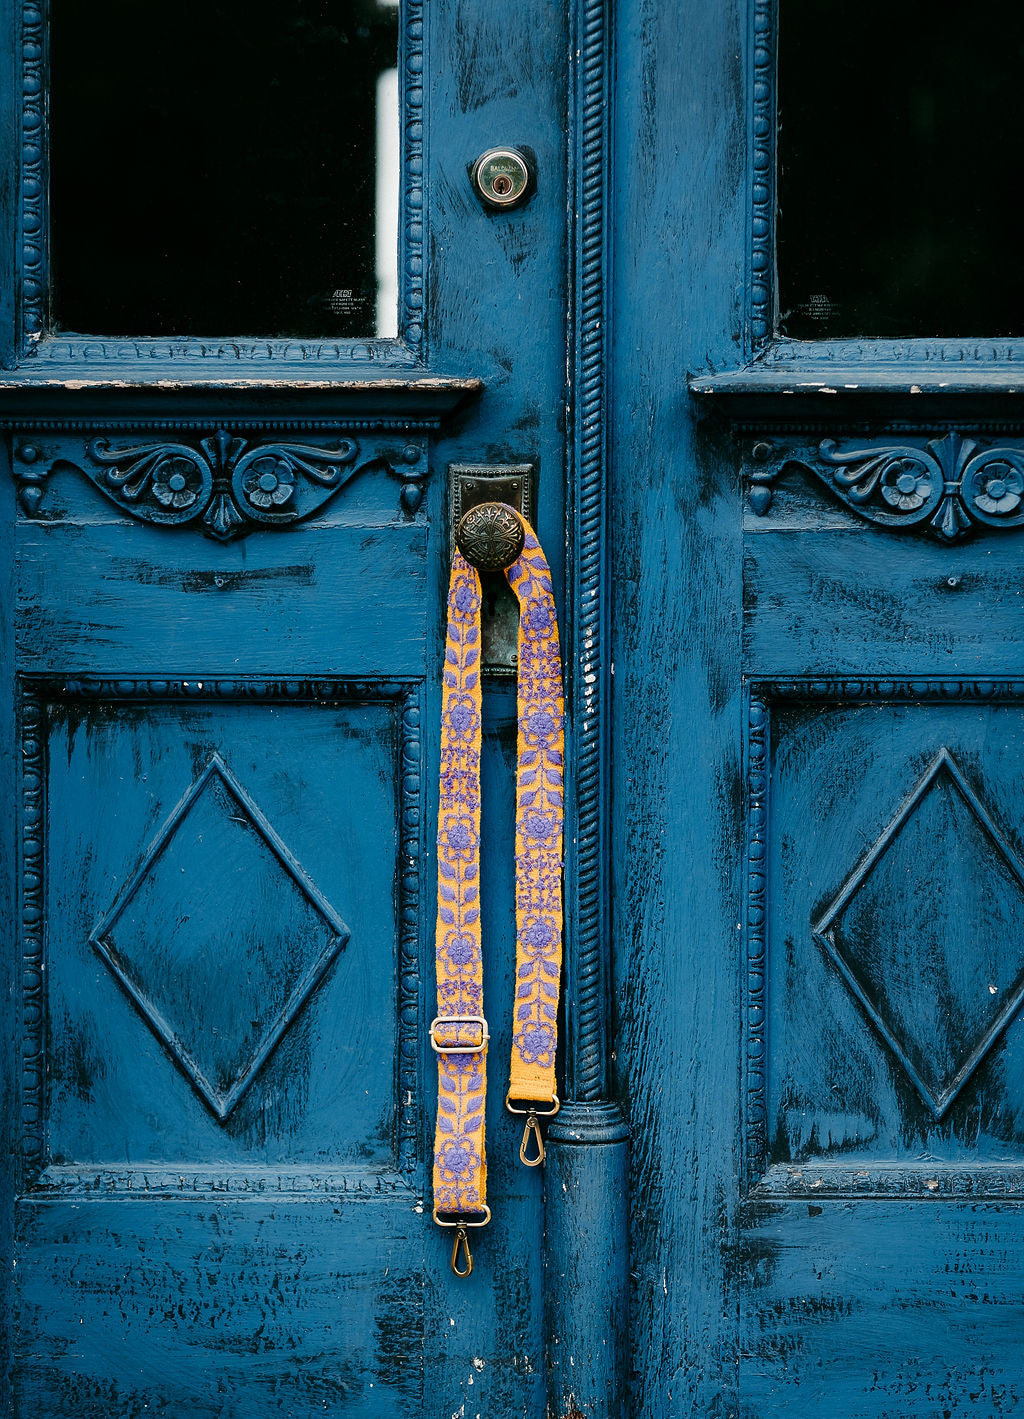 Arden Adjustable Strap: Hand-woven wool with floral and leaves design Shown hanging on a doorknob of an antique blue door.